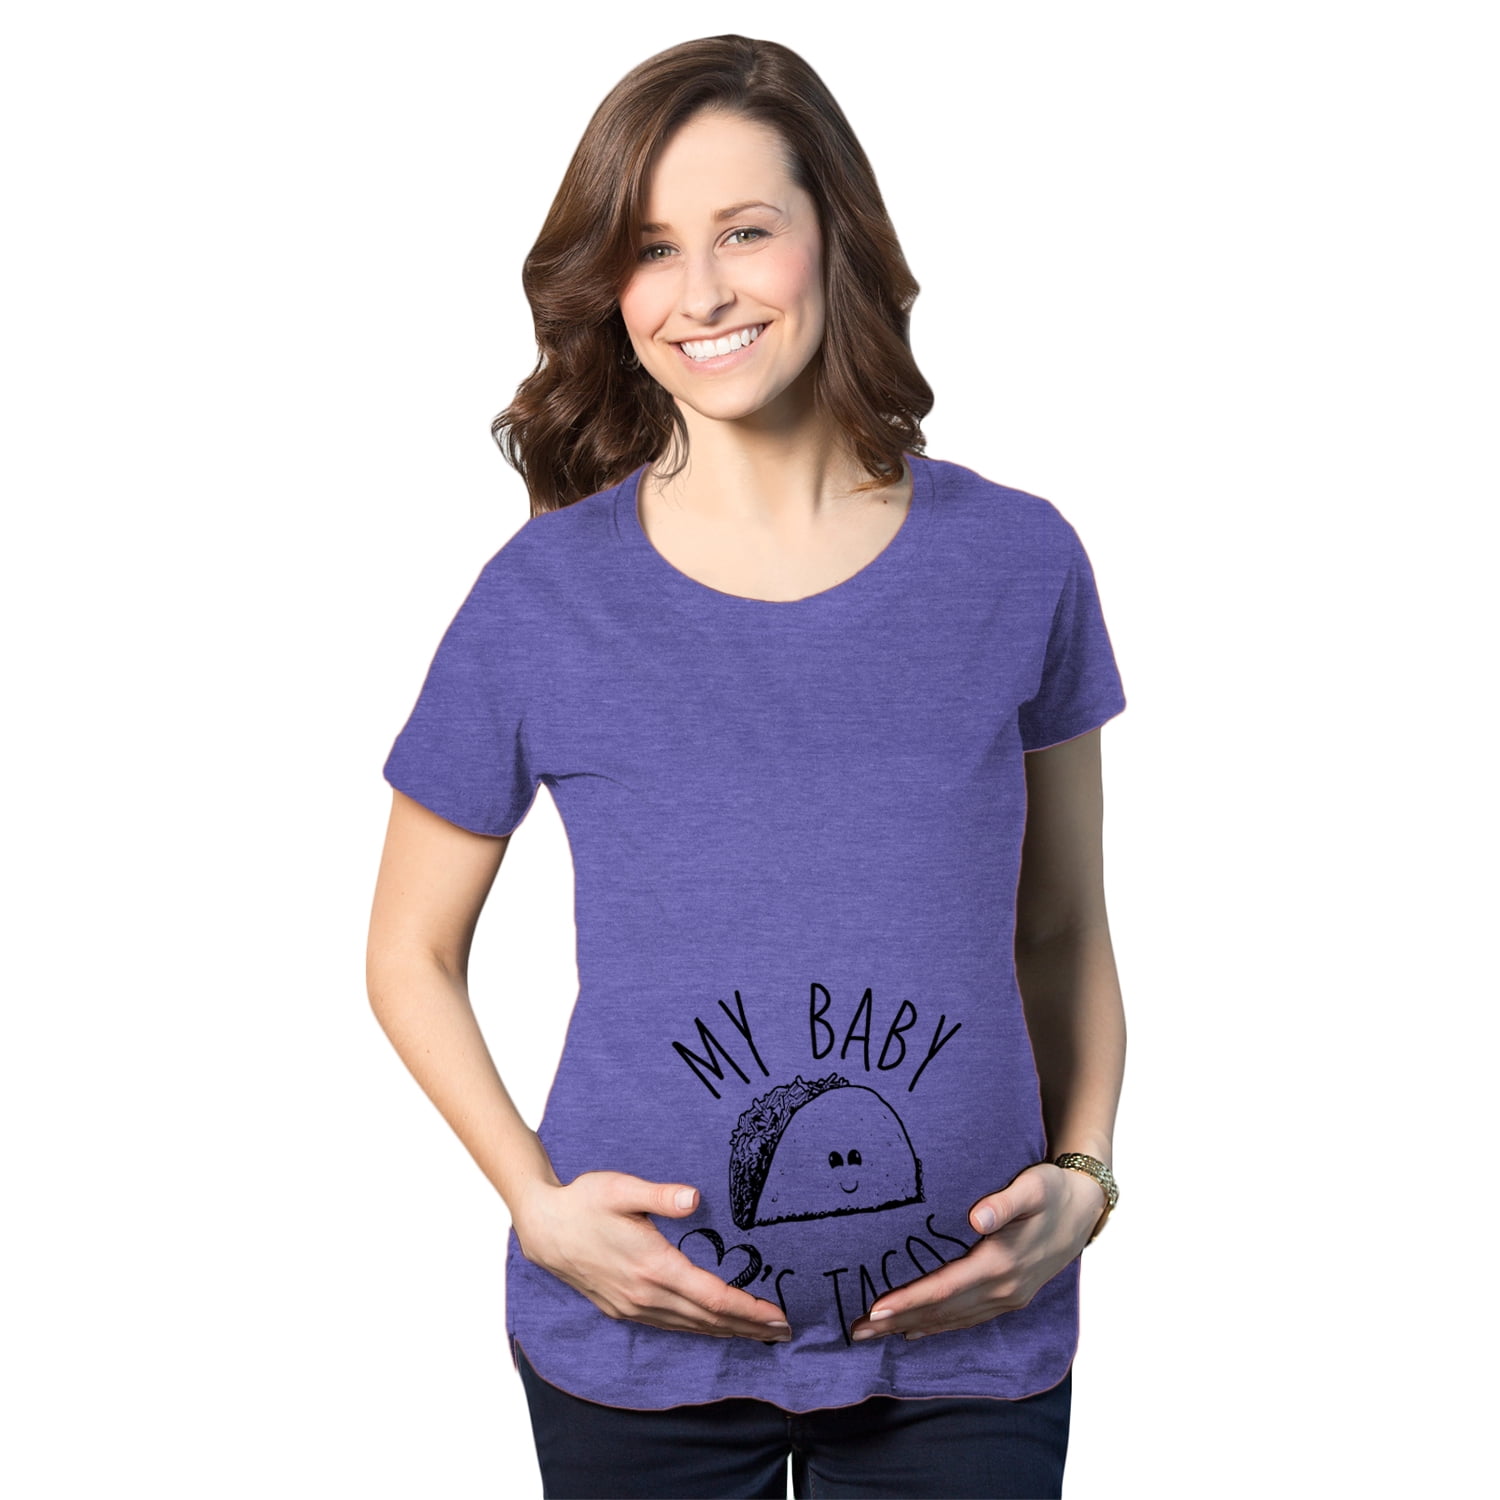 Funny Pregnancy Announcement Shirt Taco Shirt Tacos Maternity Shirt pregnancy reveal Mom To Be Not Tacos Maternity Shirt